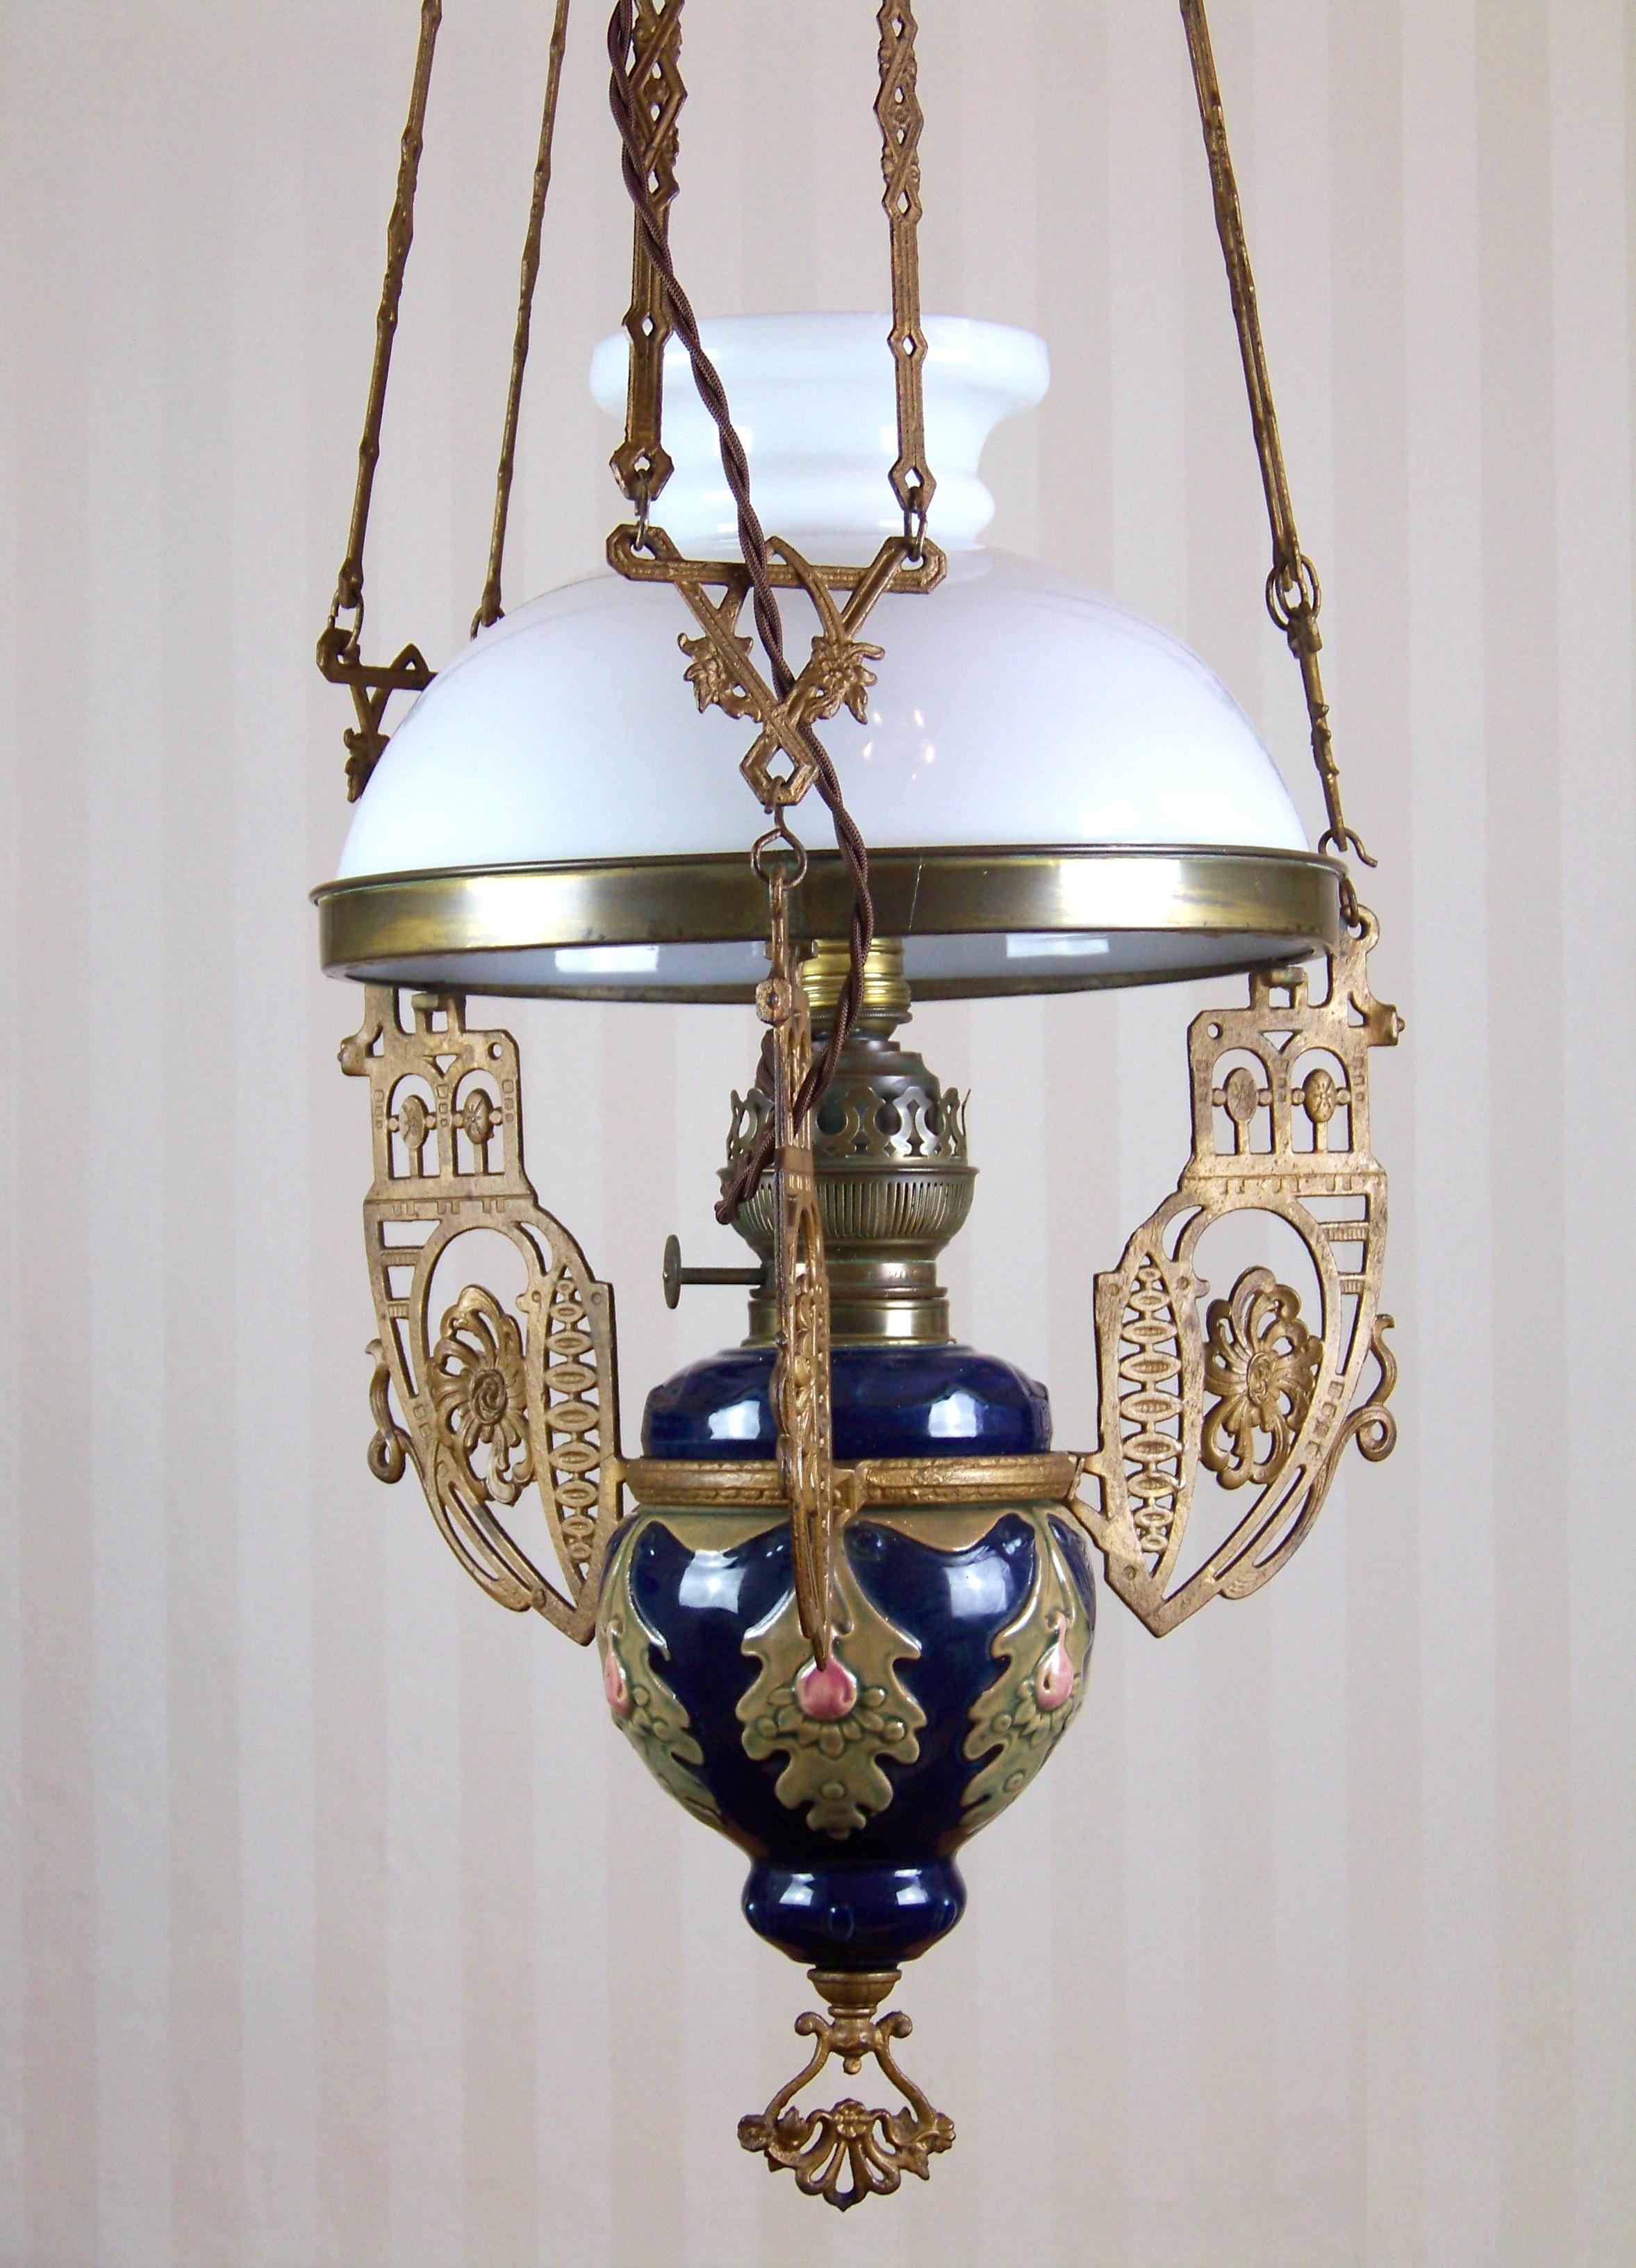 Measures: Height: 100 to 125cm (chandelier is retractable), diameter: 32cm. Originally a kerosene chandelier converted into electricity around year 1900. Perfectly cleaned, new cabling.